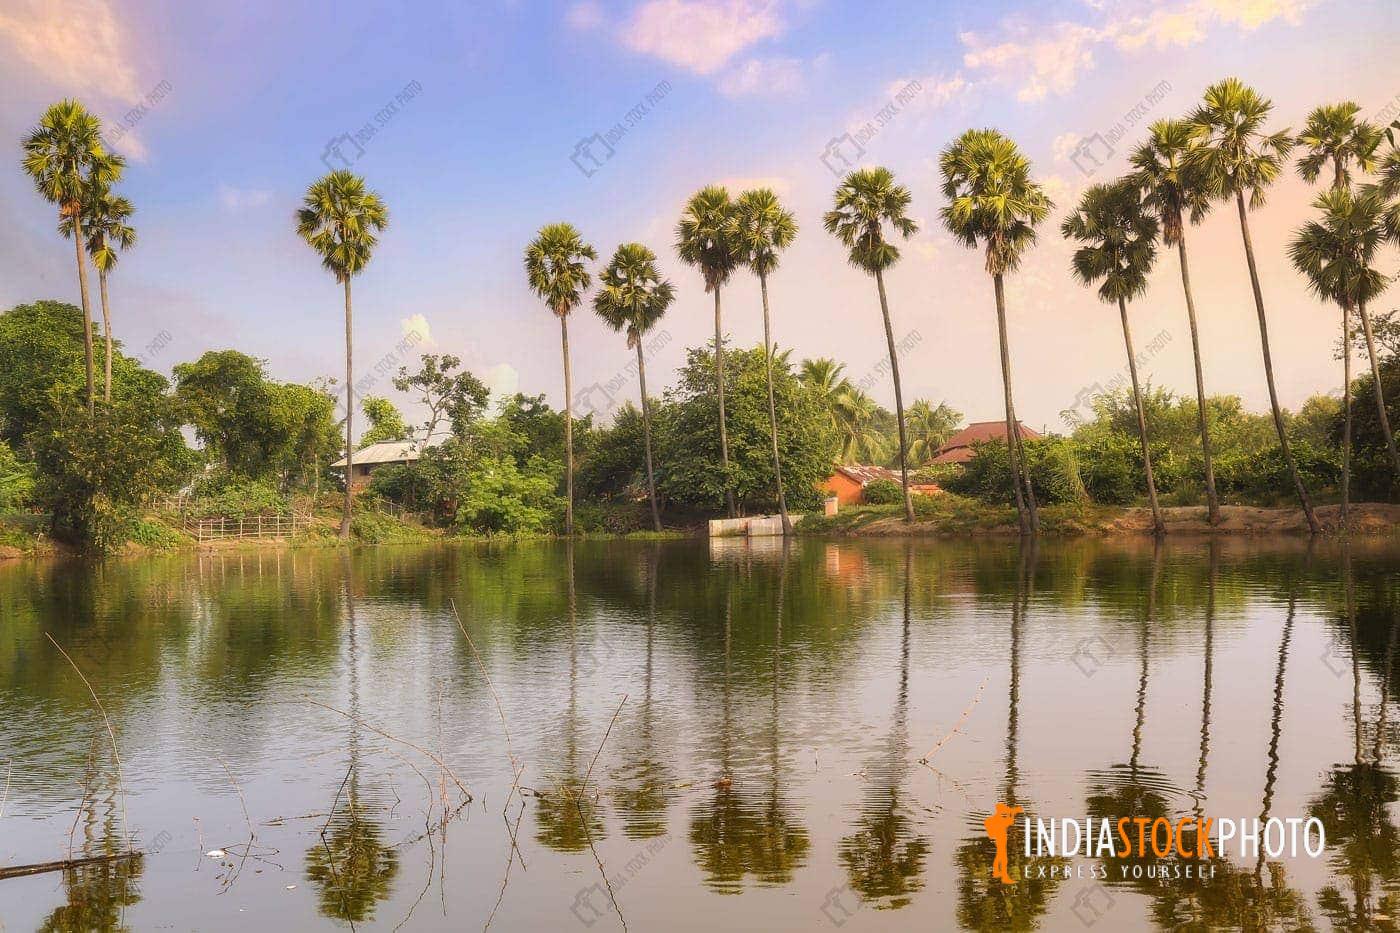 Rural Indian village pond with mud huts and foliage at sunset